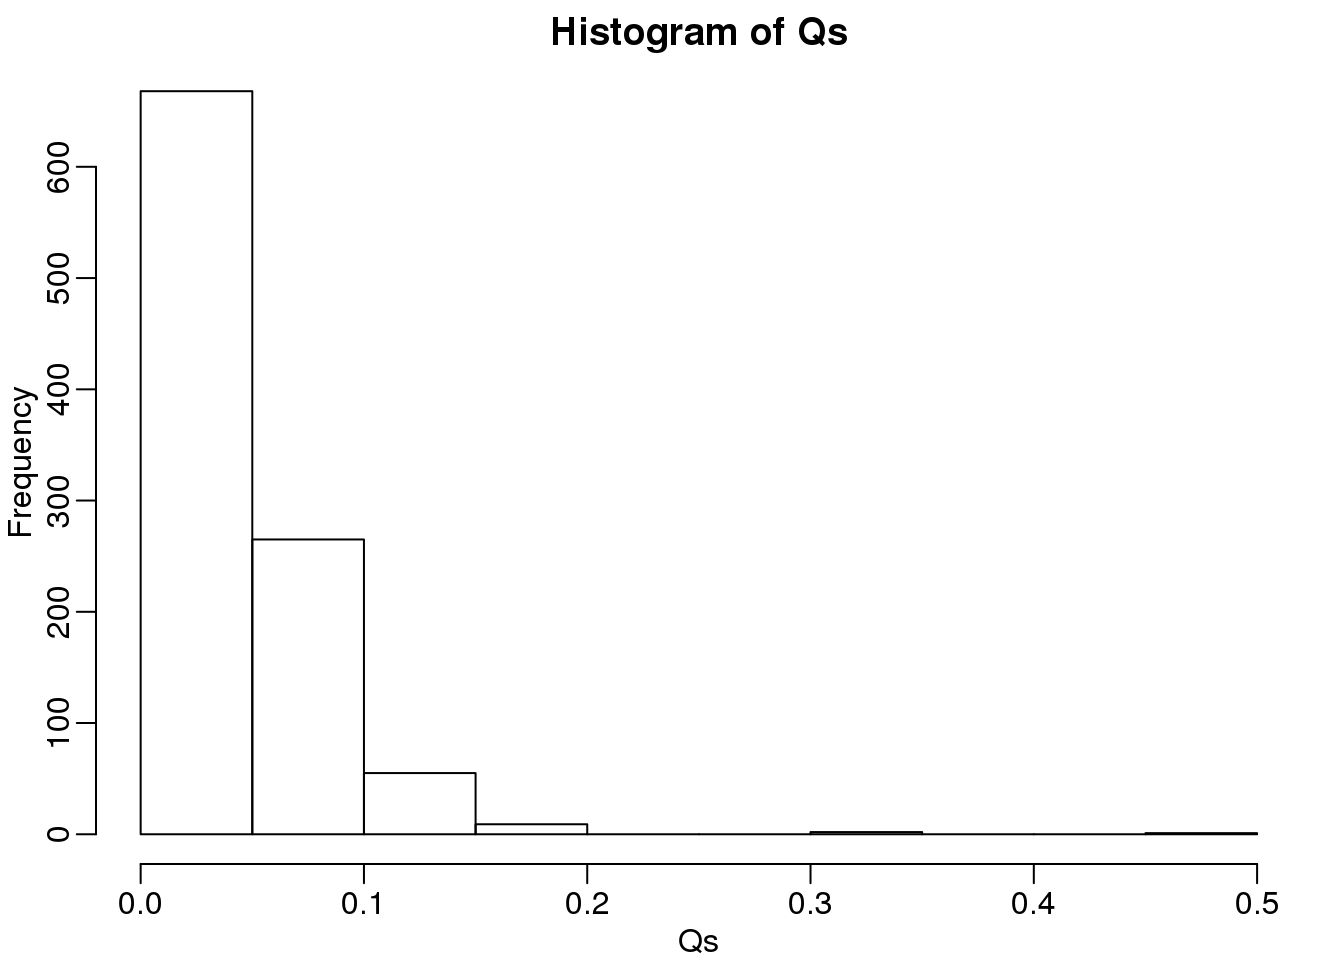 Histogram of Q (false positives divided by number of features called significant) when the alternative hypothesis is true for some features.